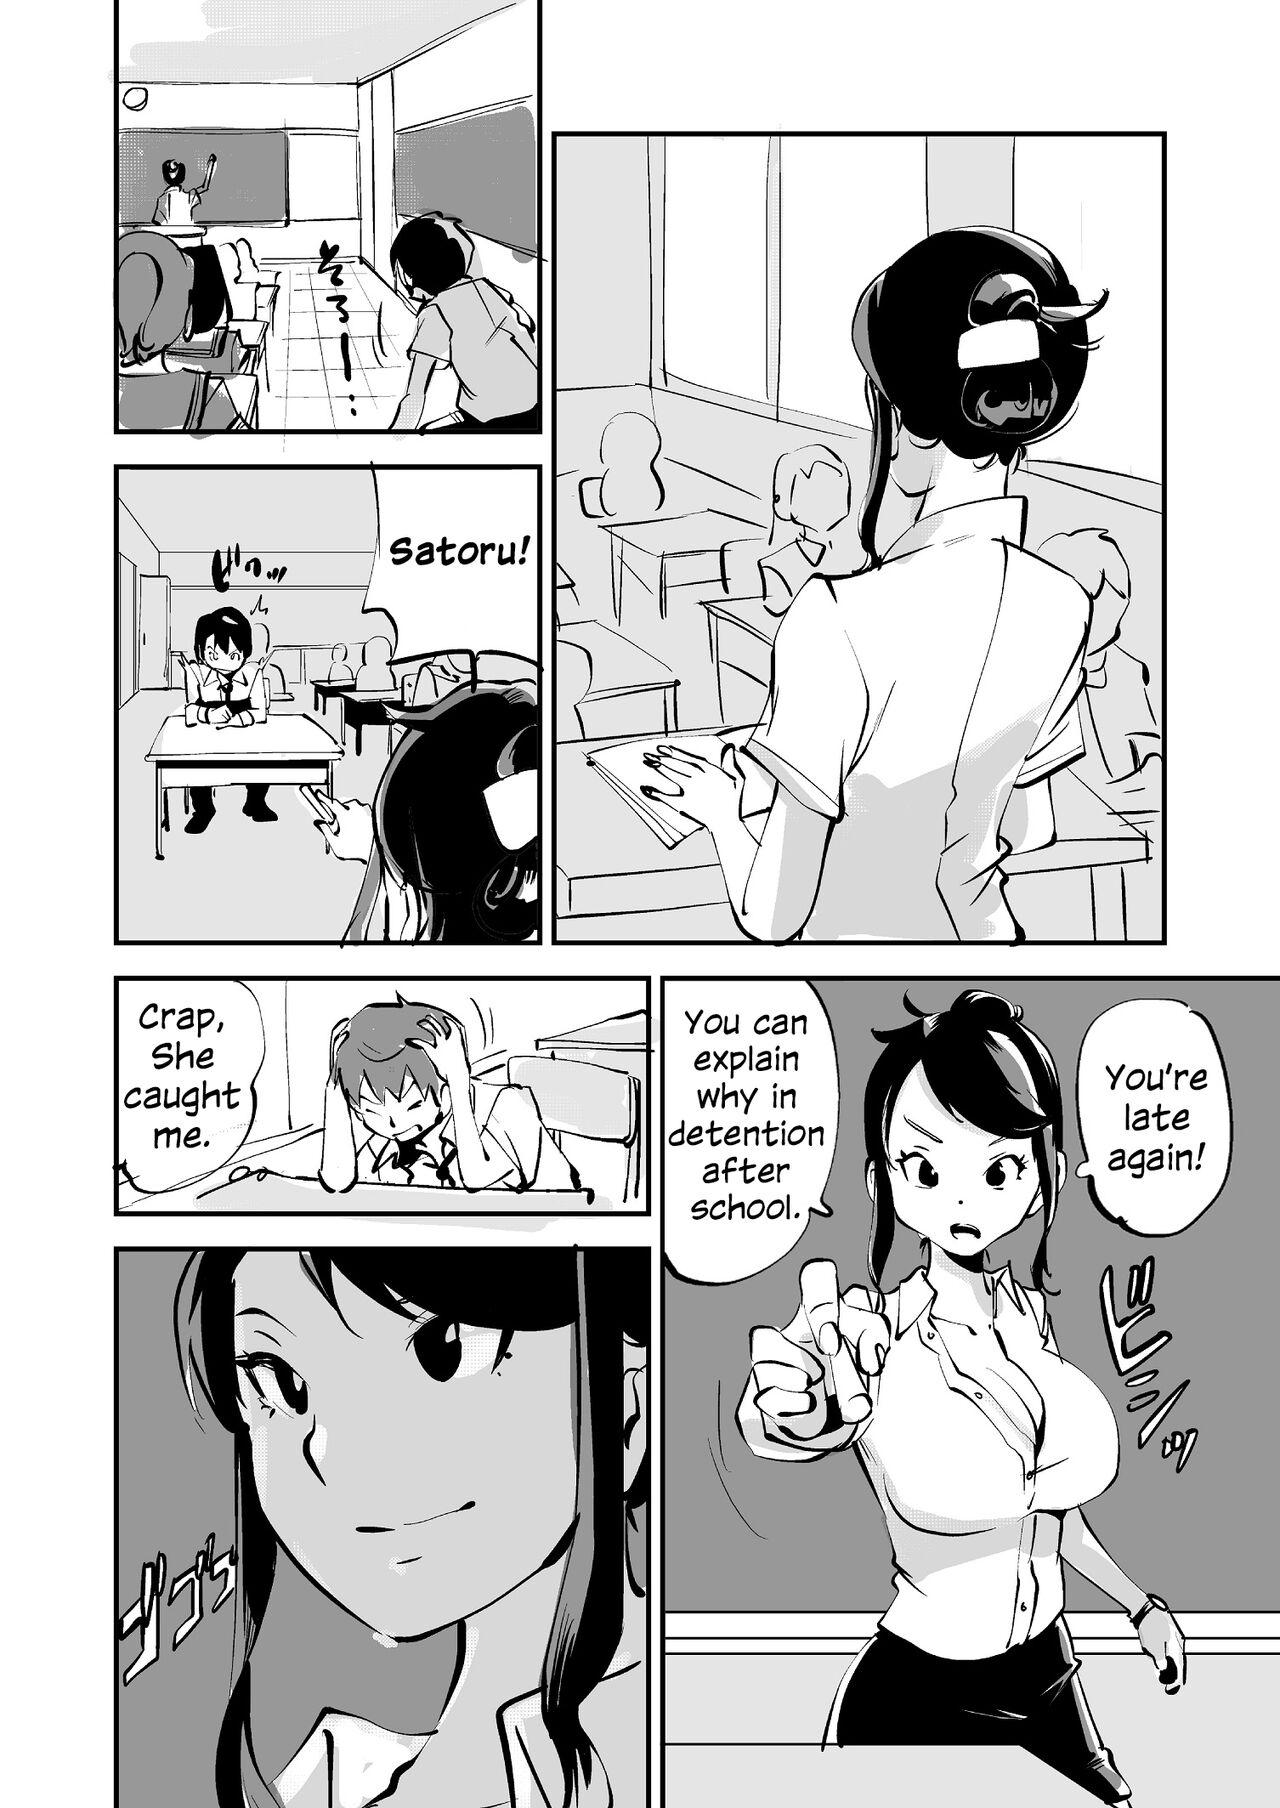 The Flesh Swapper Manga Best Blowjobs Ever - Page 2